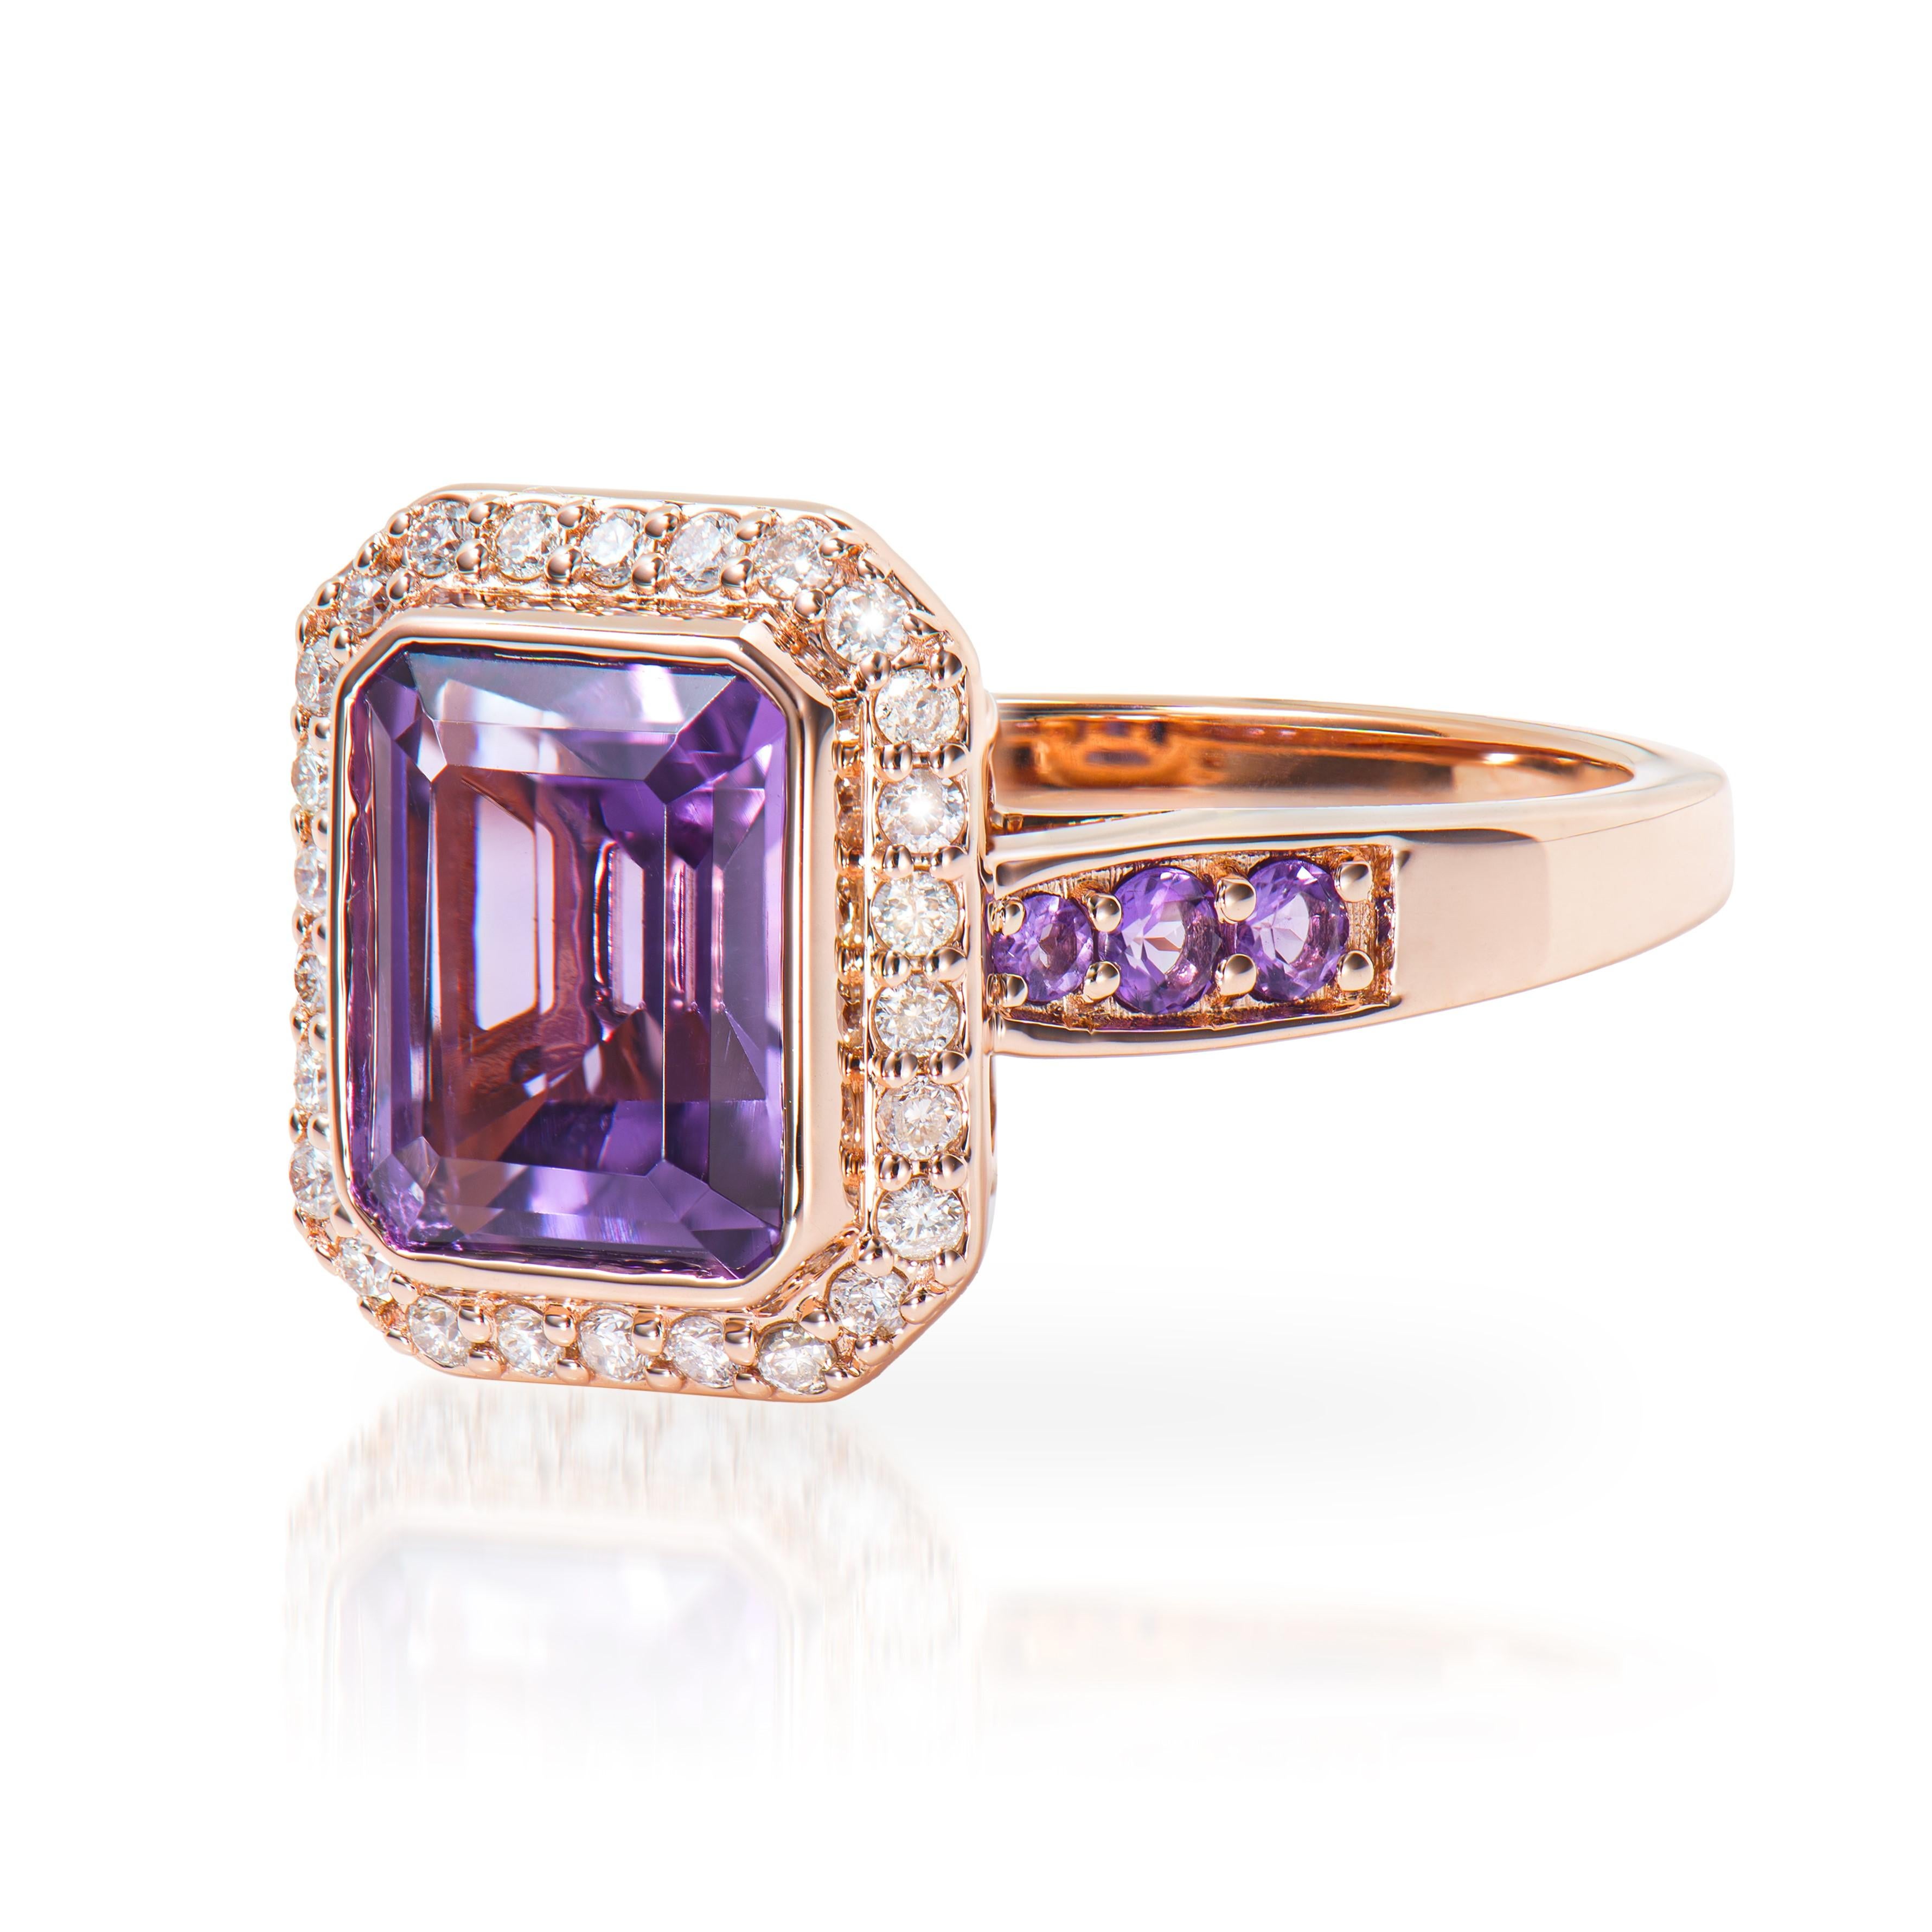 Octagon Cut 2.27 Carat Amethyst Fancy Ring in 14Karat Rose Gold with White Diamond.   For Sale